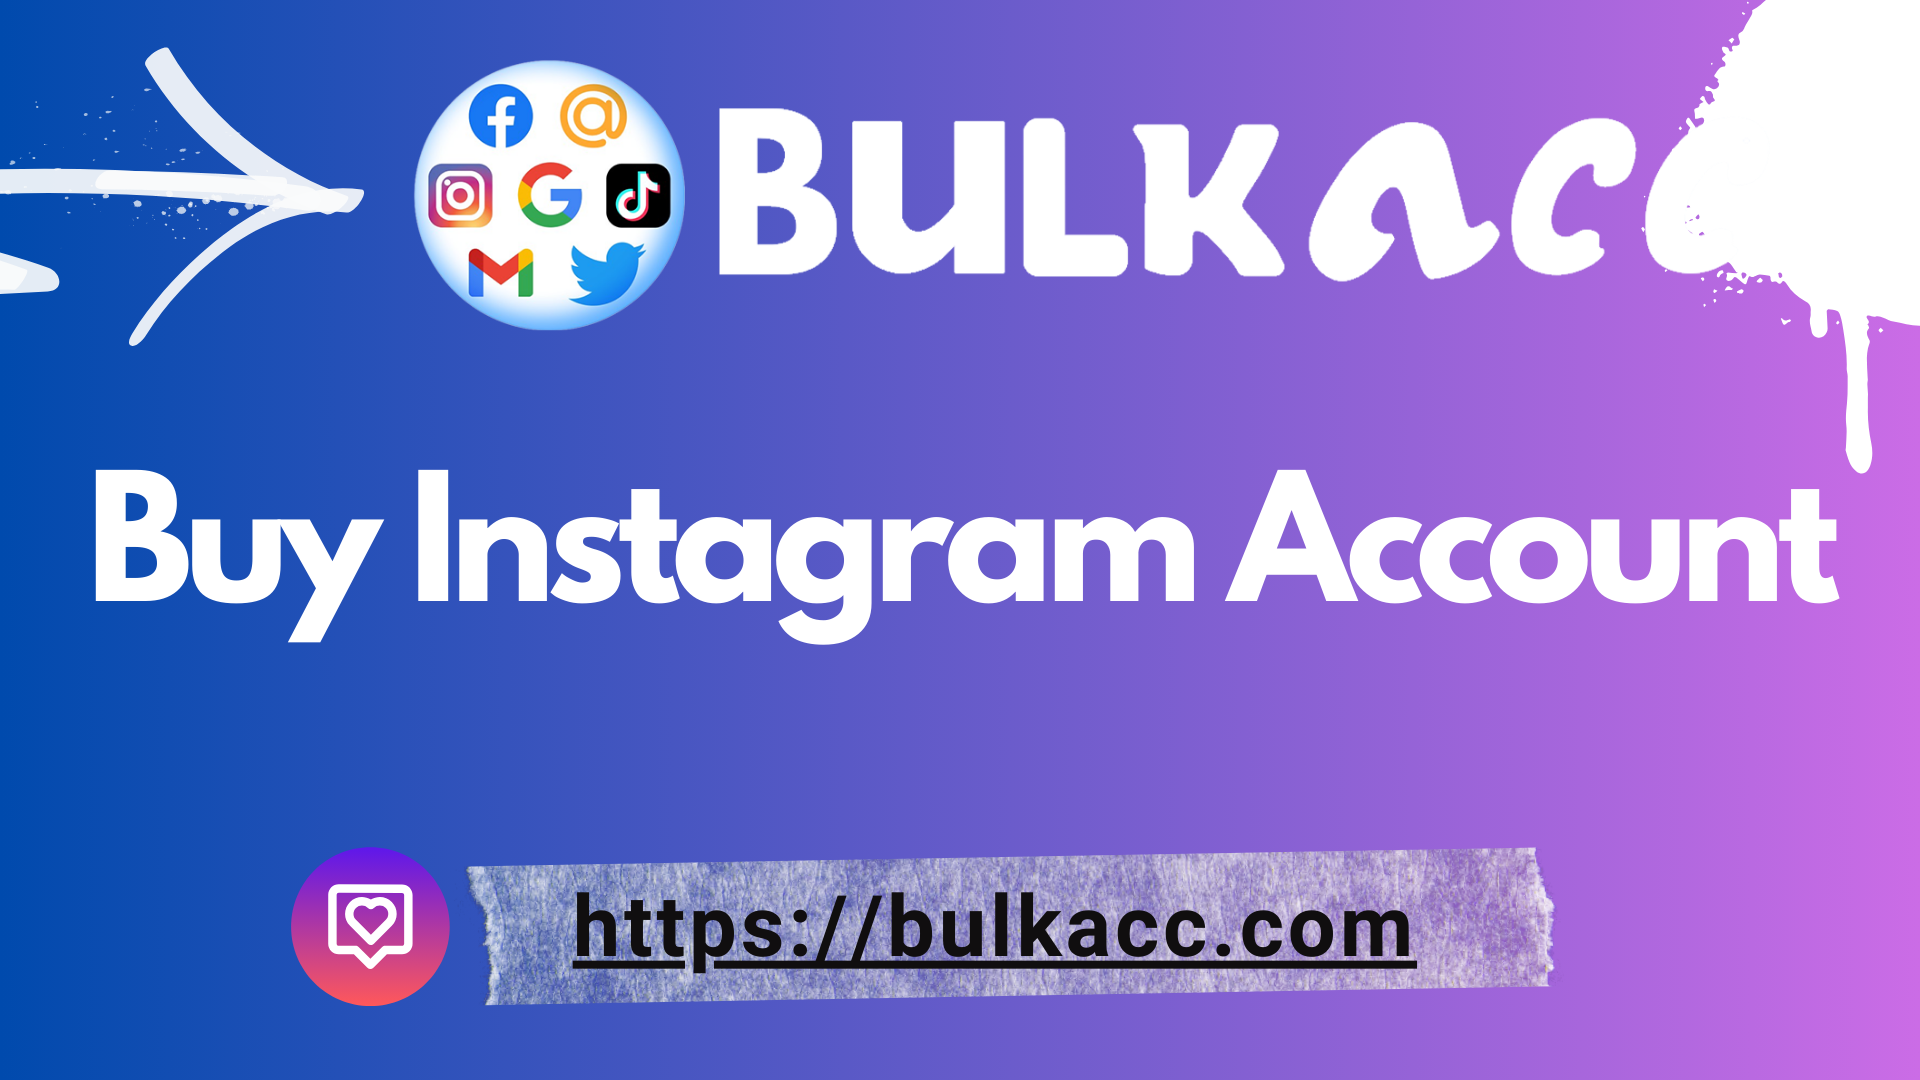 With over 1 billion active users, Instagram is the ideal platform to increase the reach and influence of businesses and social media influencers. In a fiercely competitive environment, the need to own multiple Instagram accounts increases to increase competitiveness. One of the most effective ways to have multiple Instagram accounts is to buy Instagram accounts in bulk.